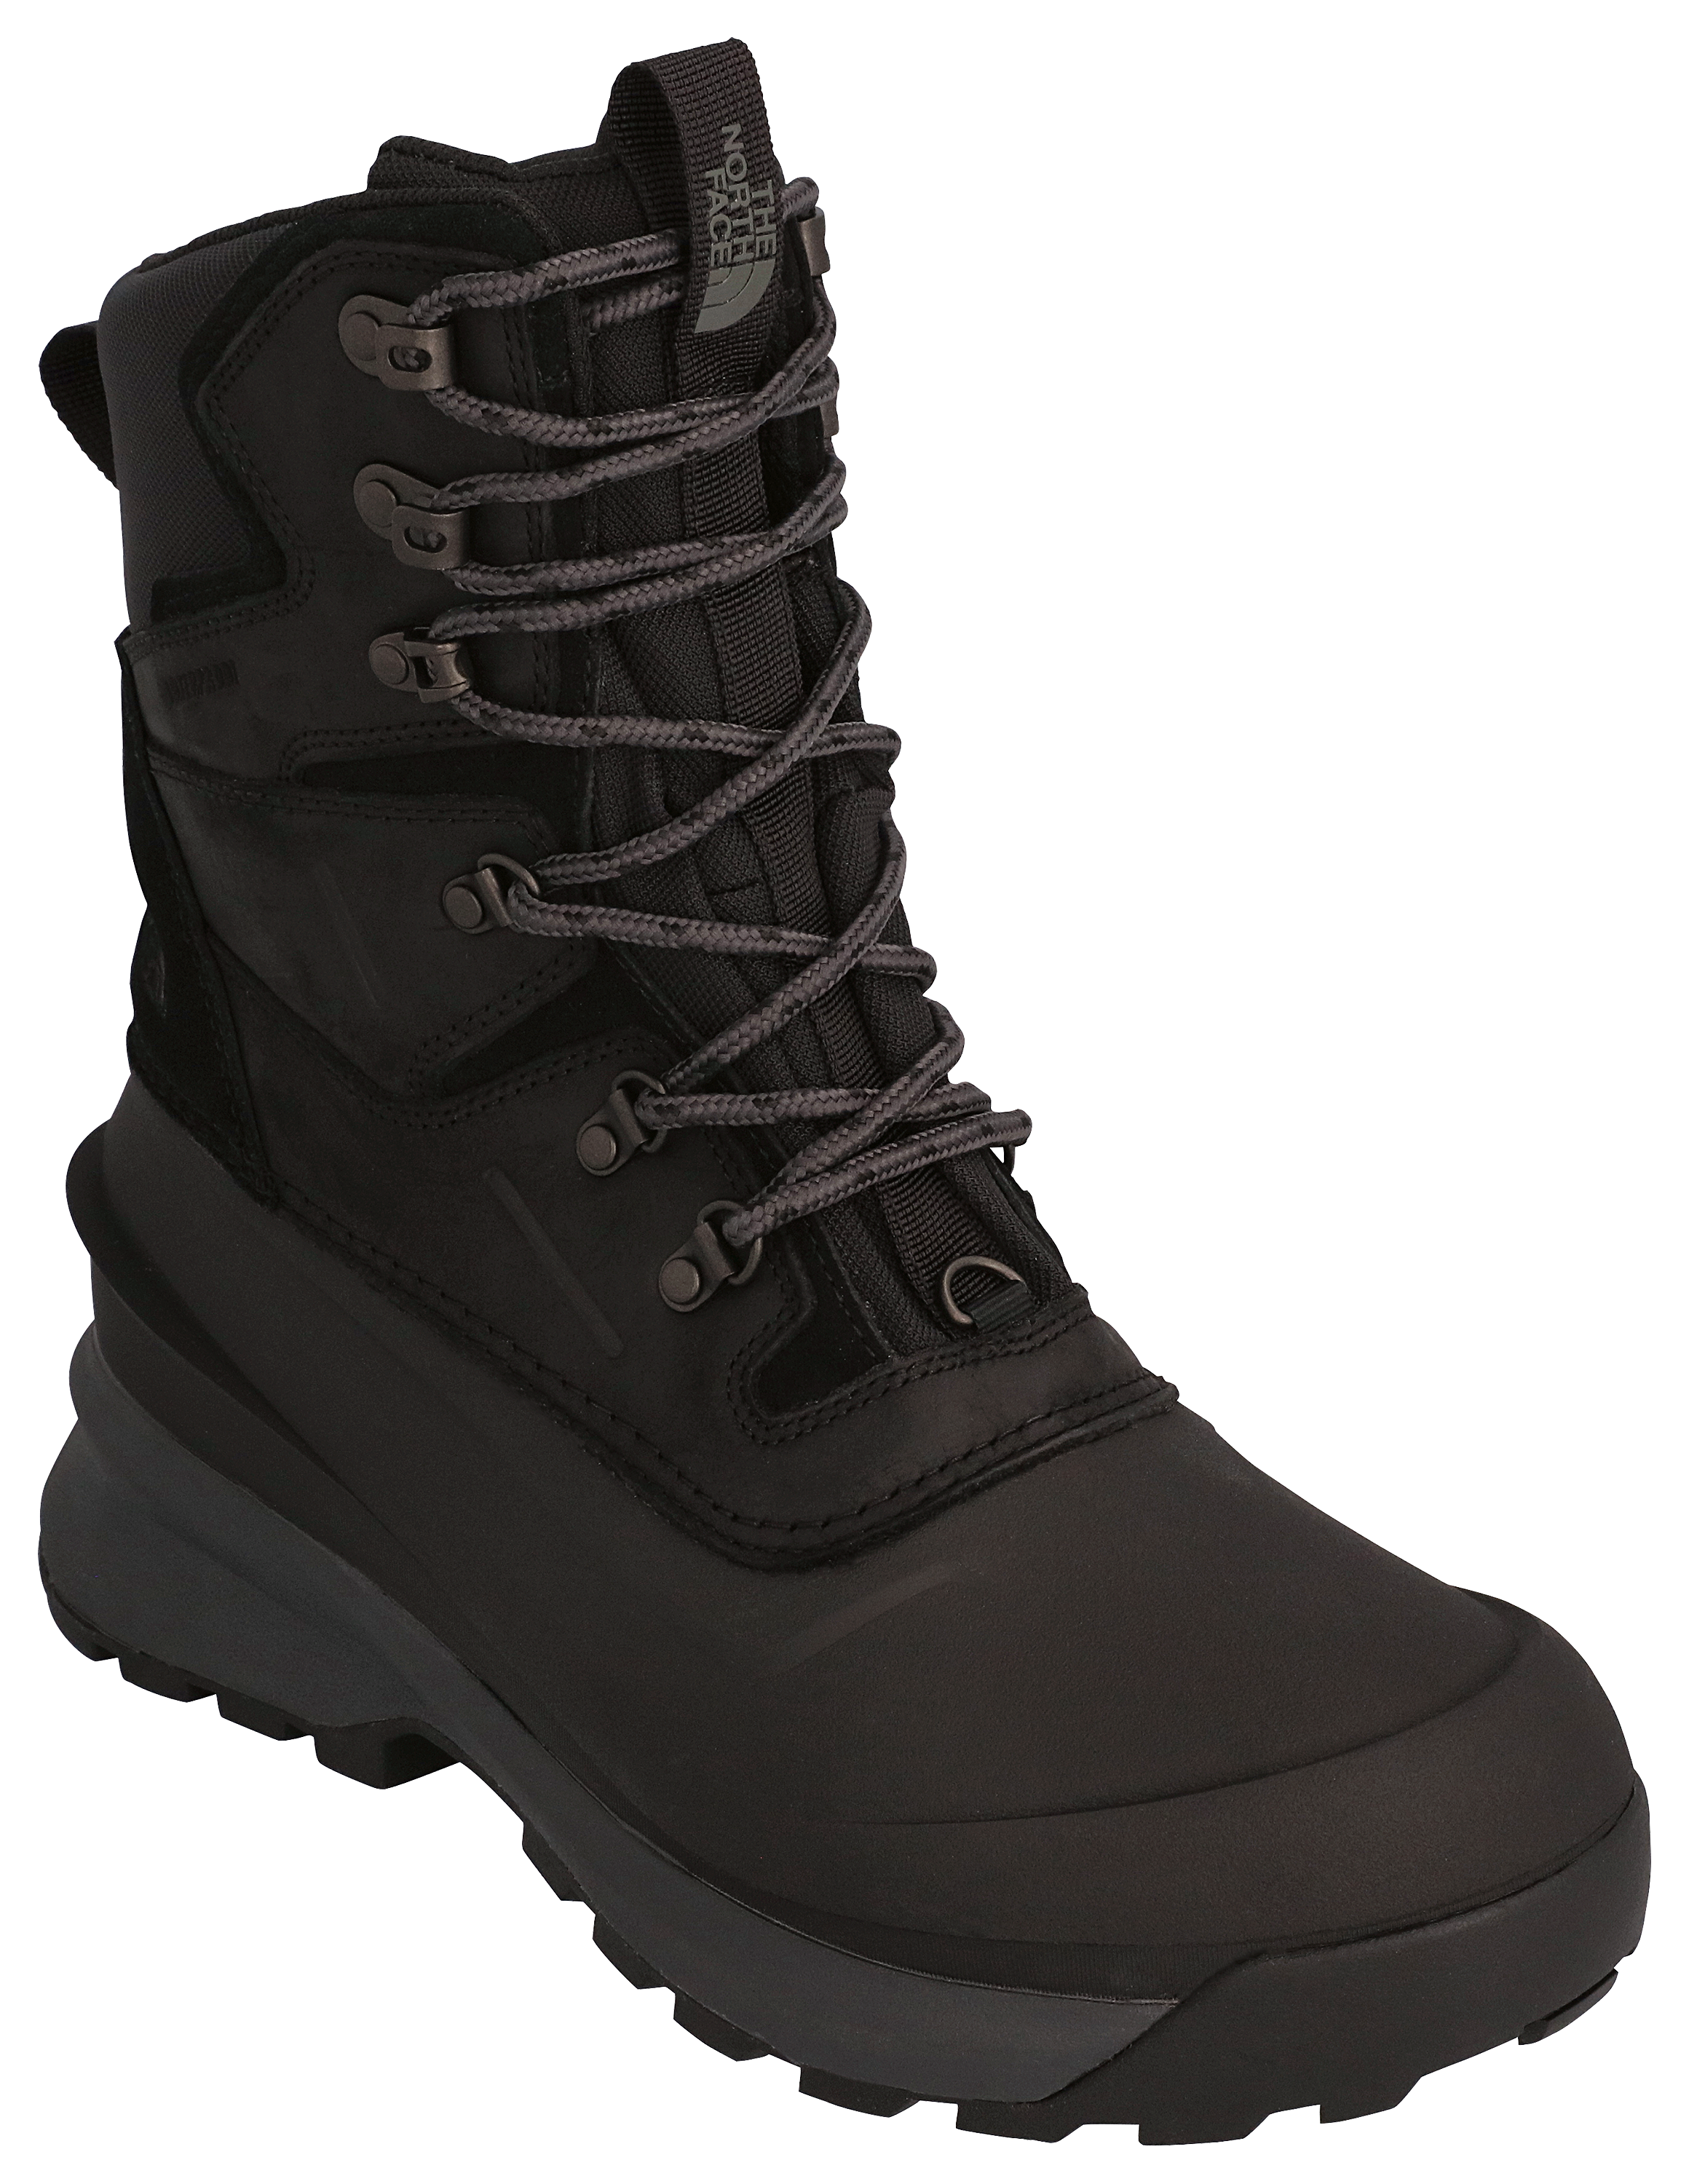 The North Face Chilkat V 400 Insulated Waterproof Pac Boots for Men